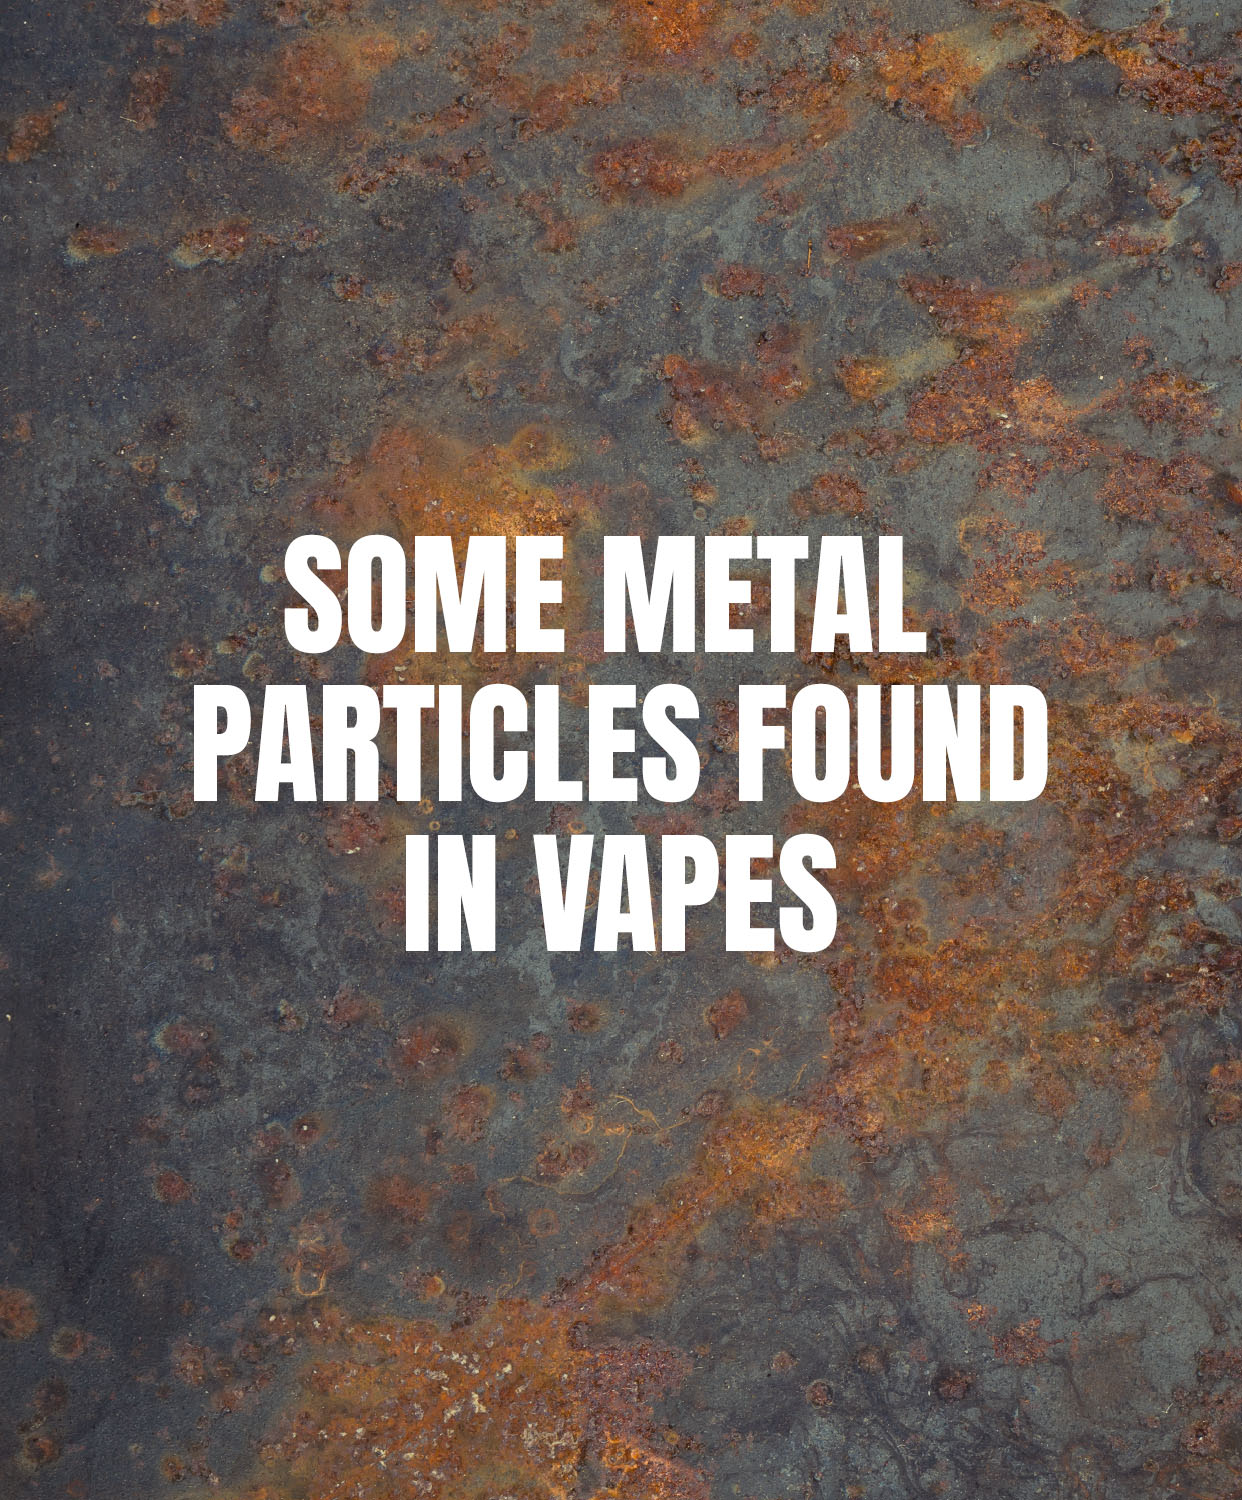 Some metal particles found in vapes